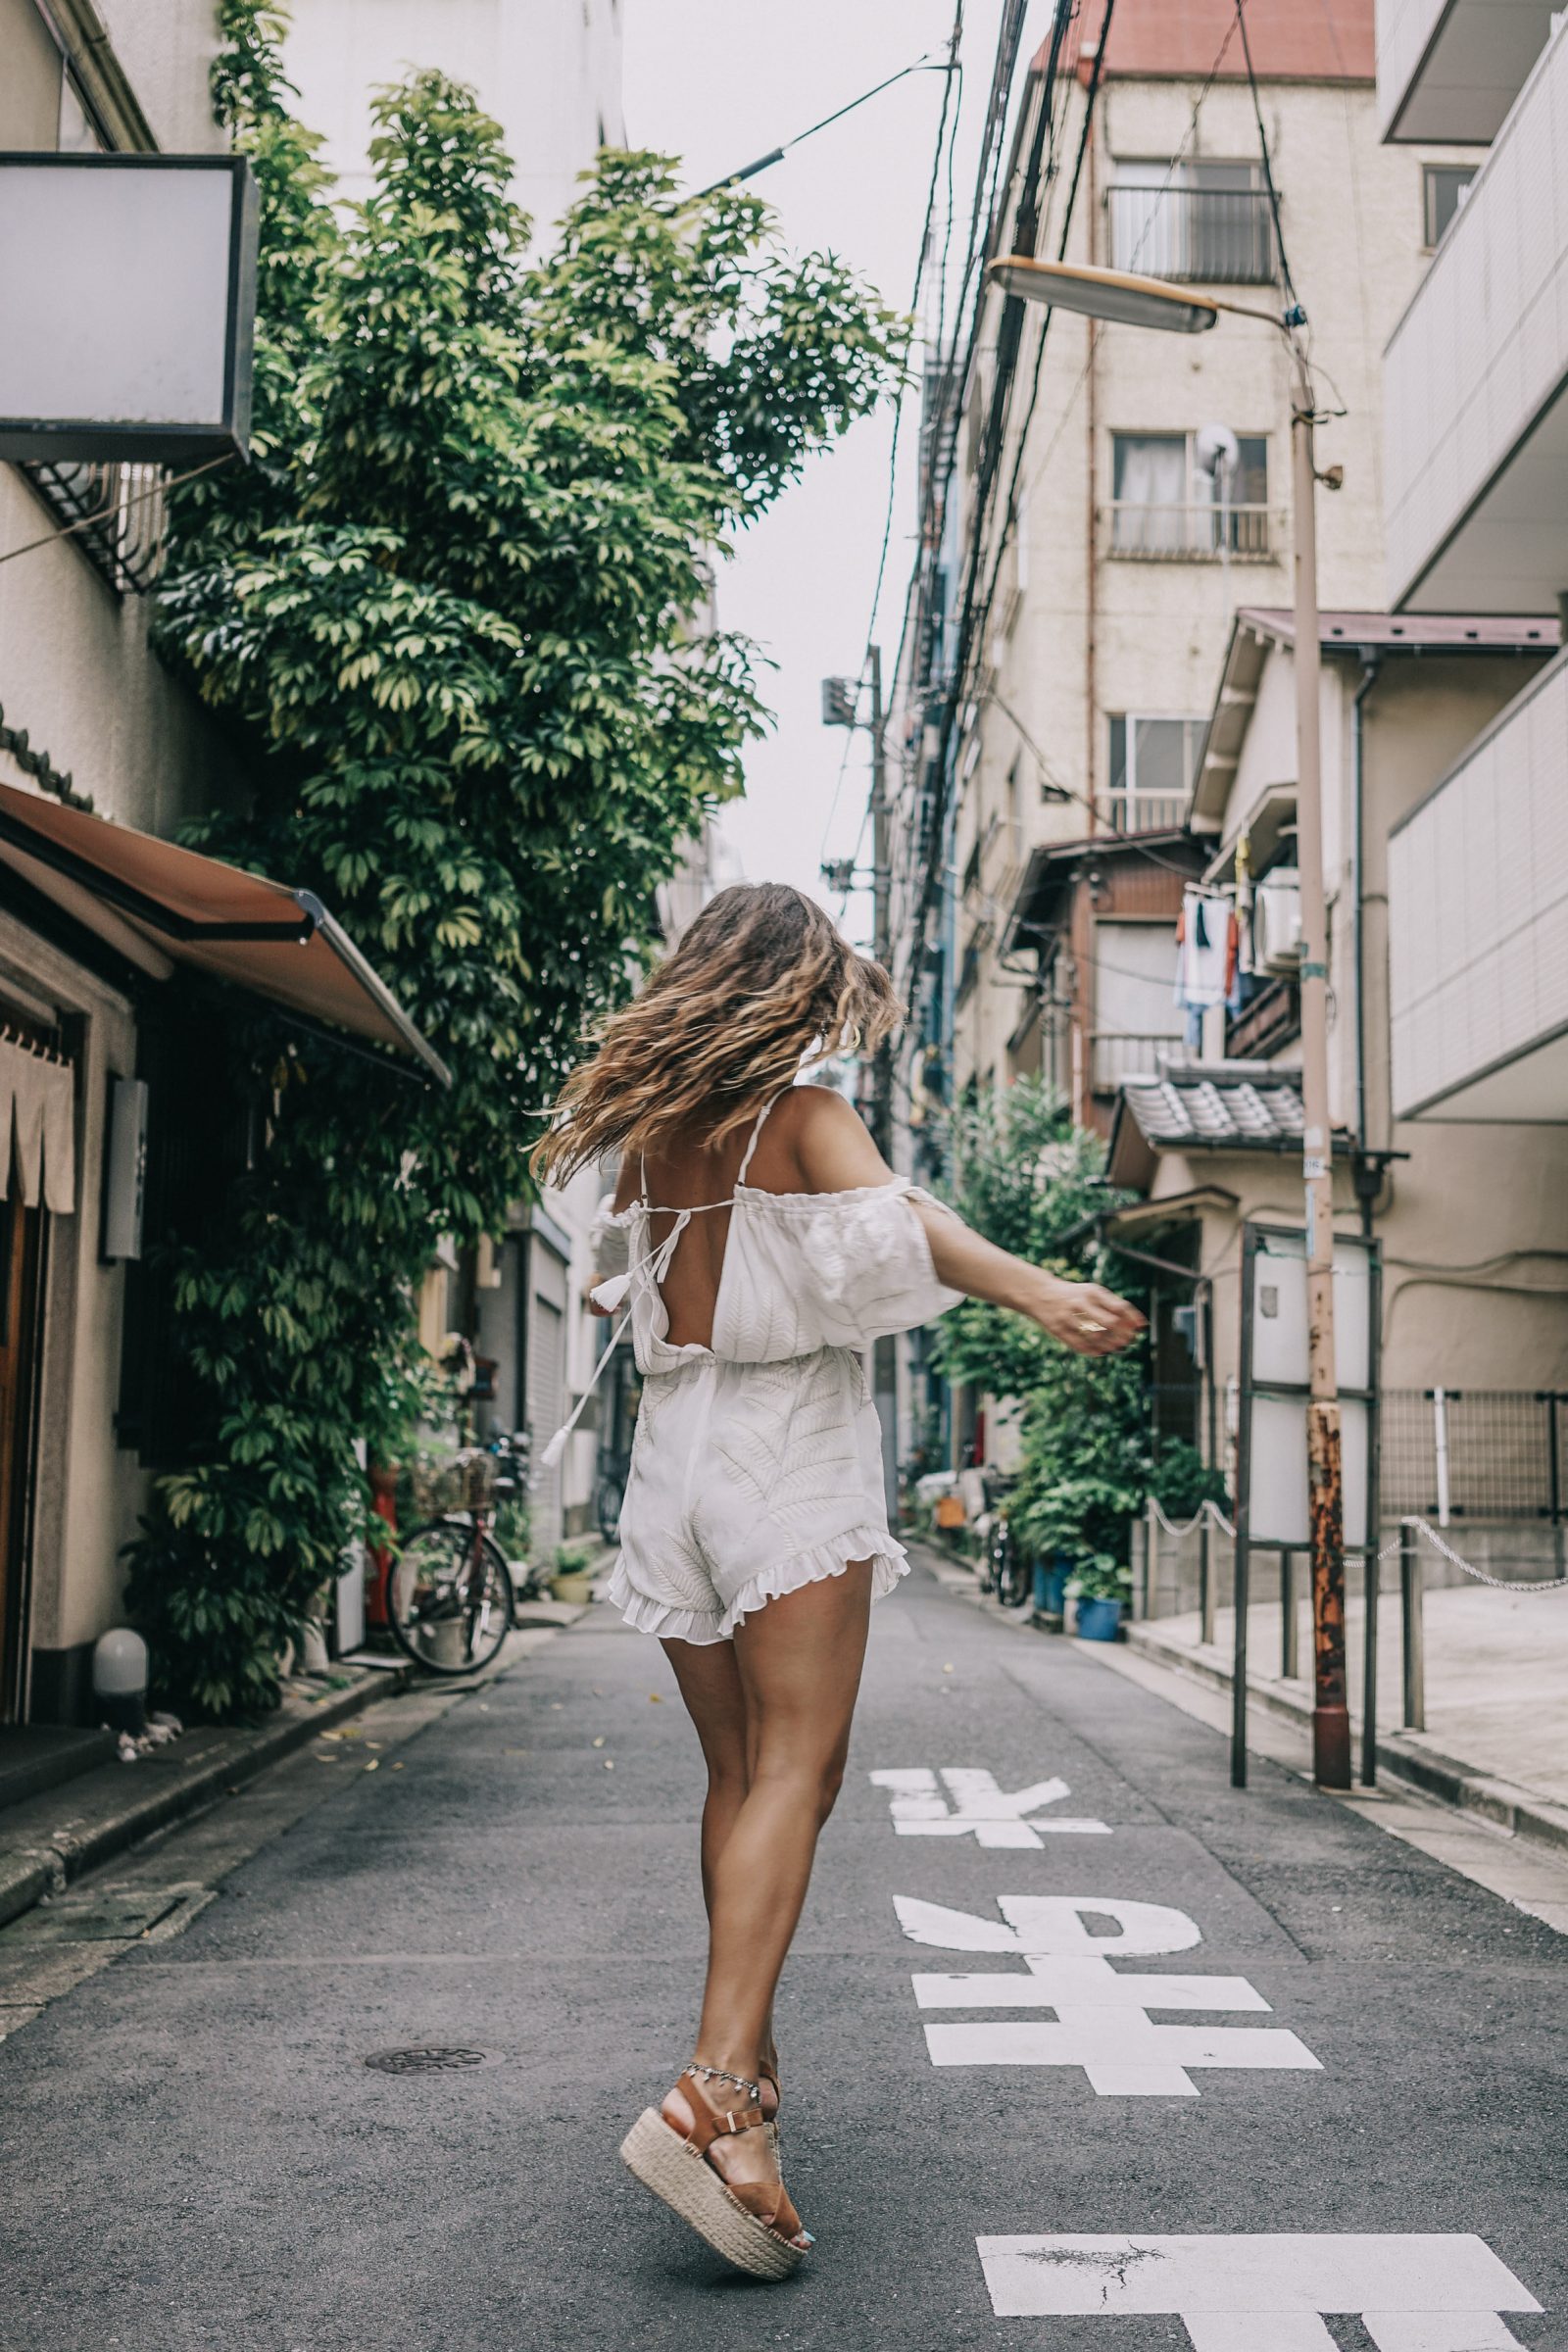 tokyo_travel_guide-outfit-collage_vintage-street_style-lovers_and_friends_jumpsuit-white_outfit-espadrilles-backpack-levis_denim_jacket-akihabara-79